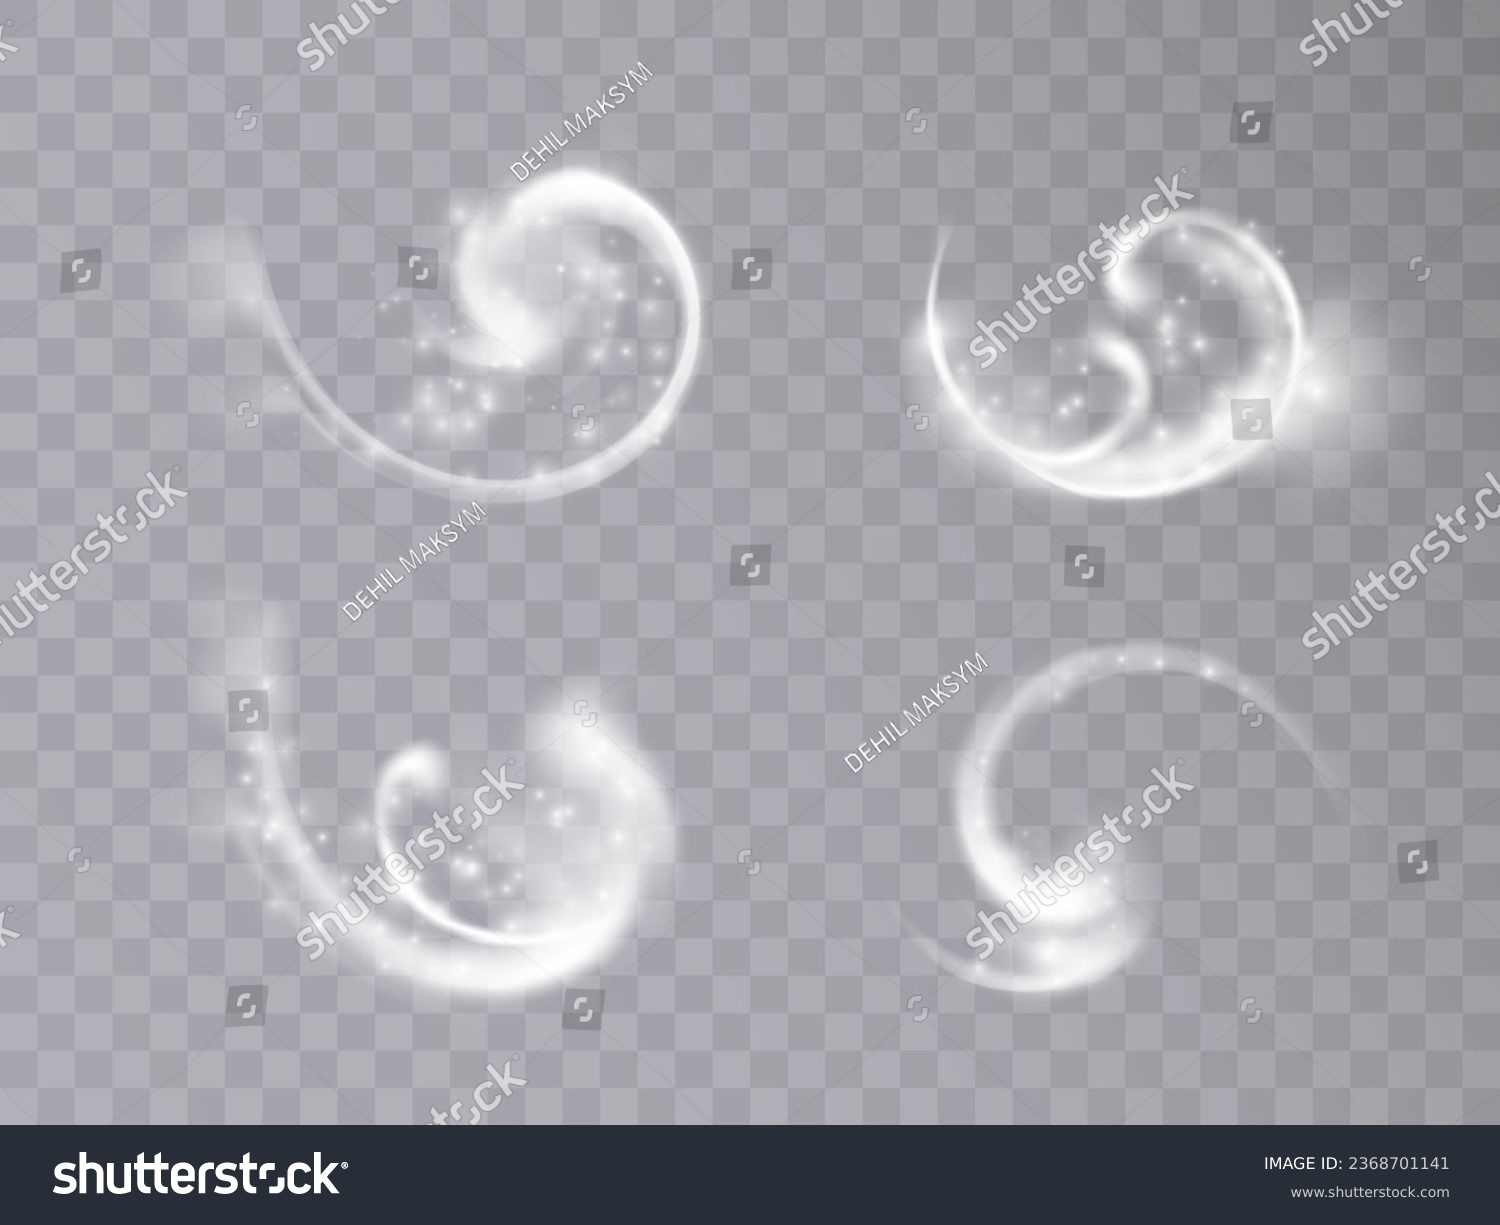 The effect of a fabulous magical winter snowstorm. Christmas snow background. Wind swirl with snowflakes and shimmering effects. Snow storm concept. Vector #2368701141